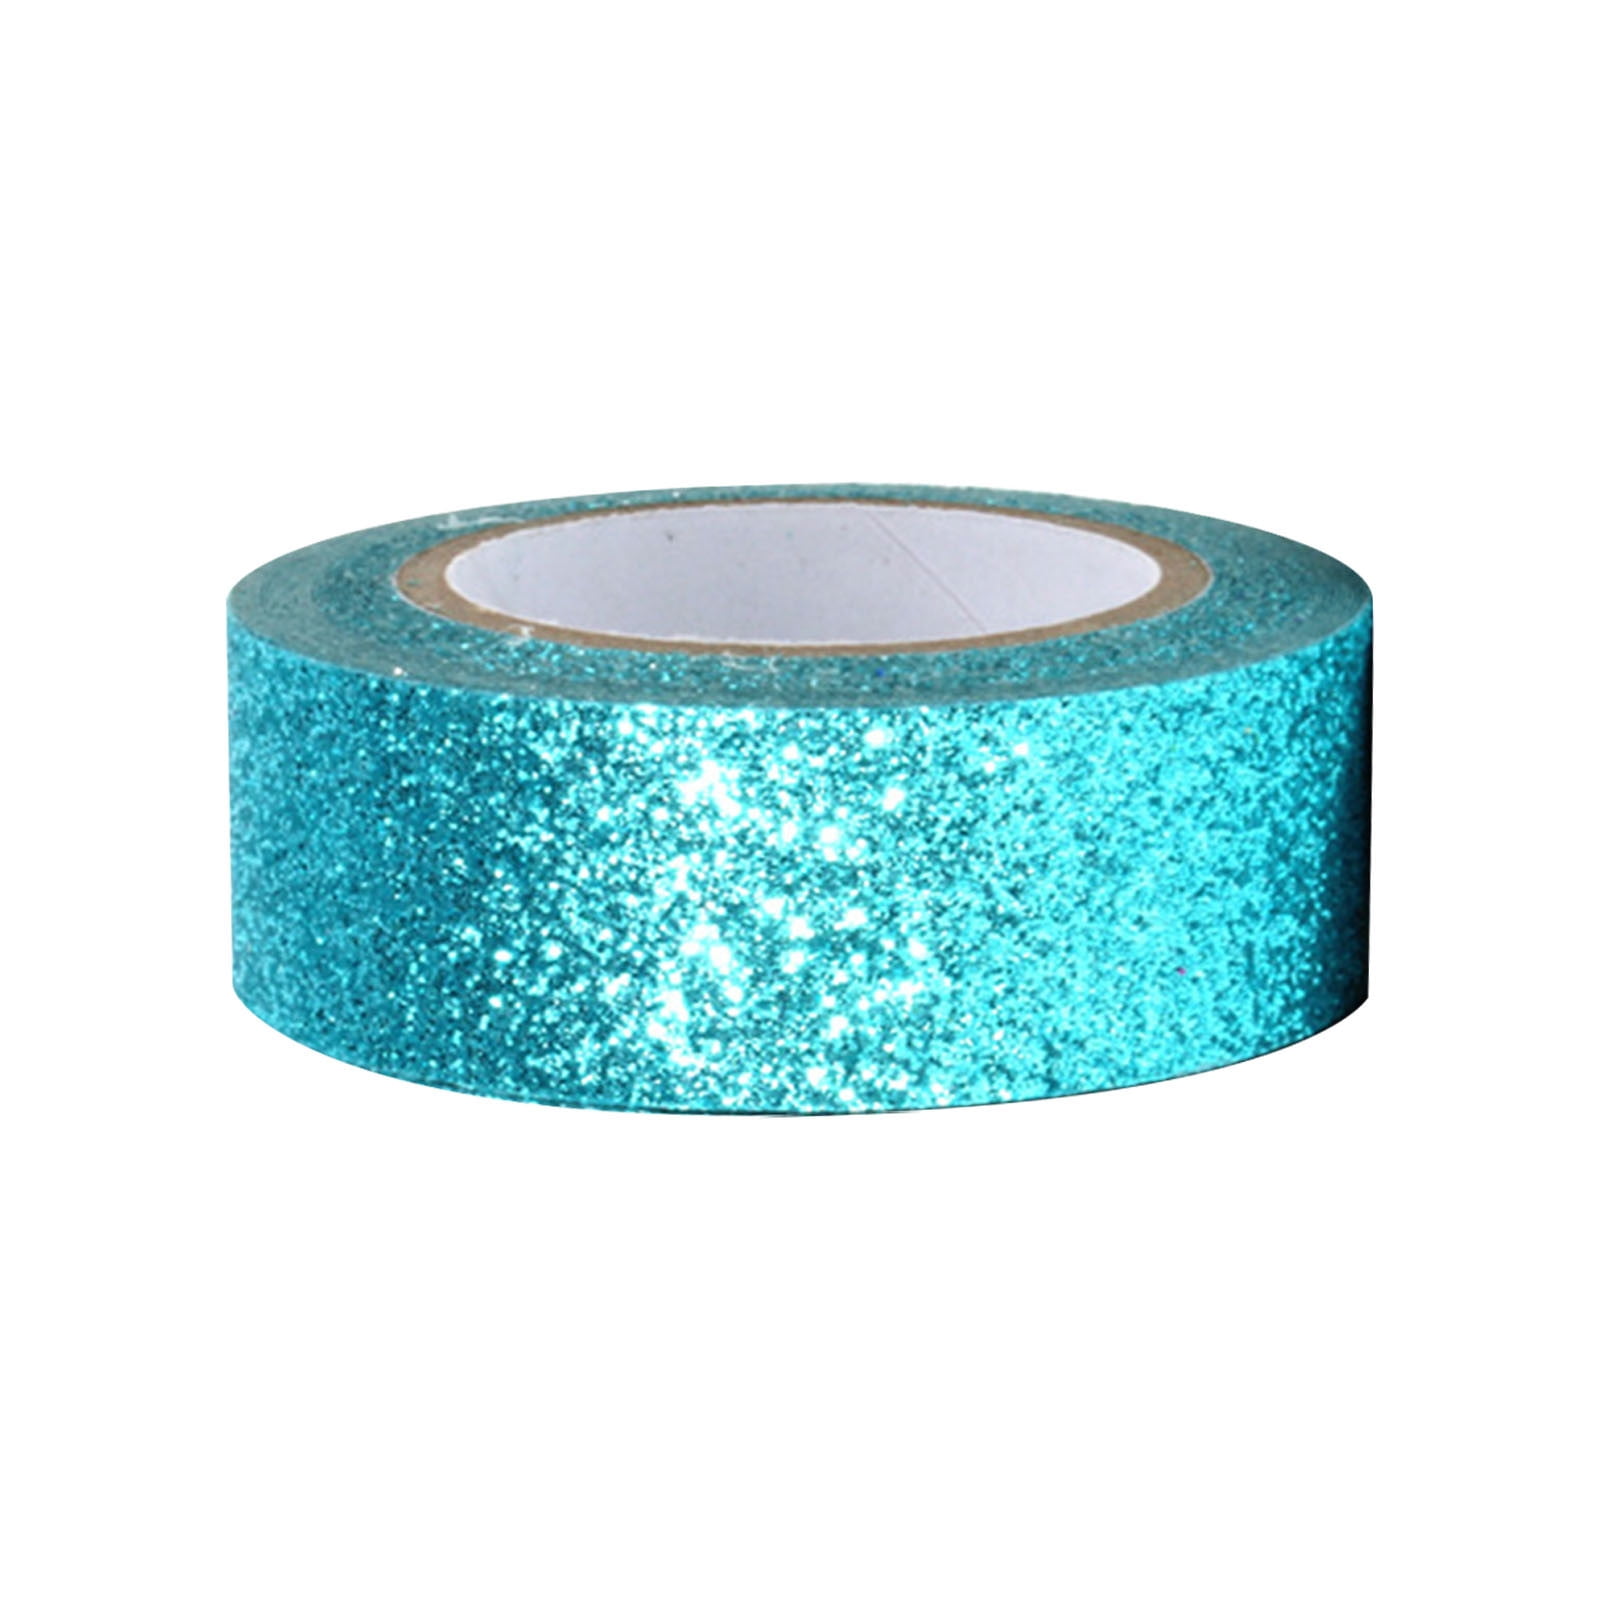 Ploknplq Painters Tape Masking Tape Decorative Tape Craft Self Adhesive  Stickers Adhesive Glitter Decoration for Diy Crafts Gift Packaging  Scrapbooking Etc Packing Tape 